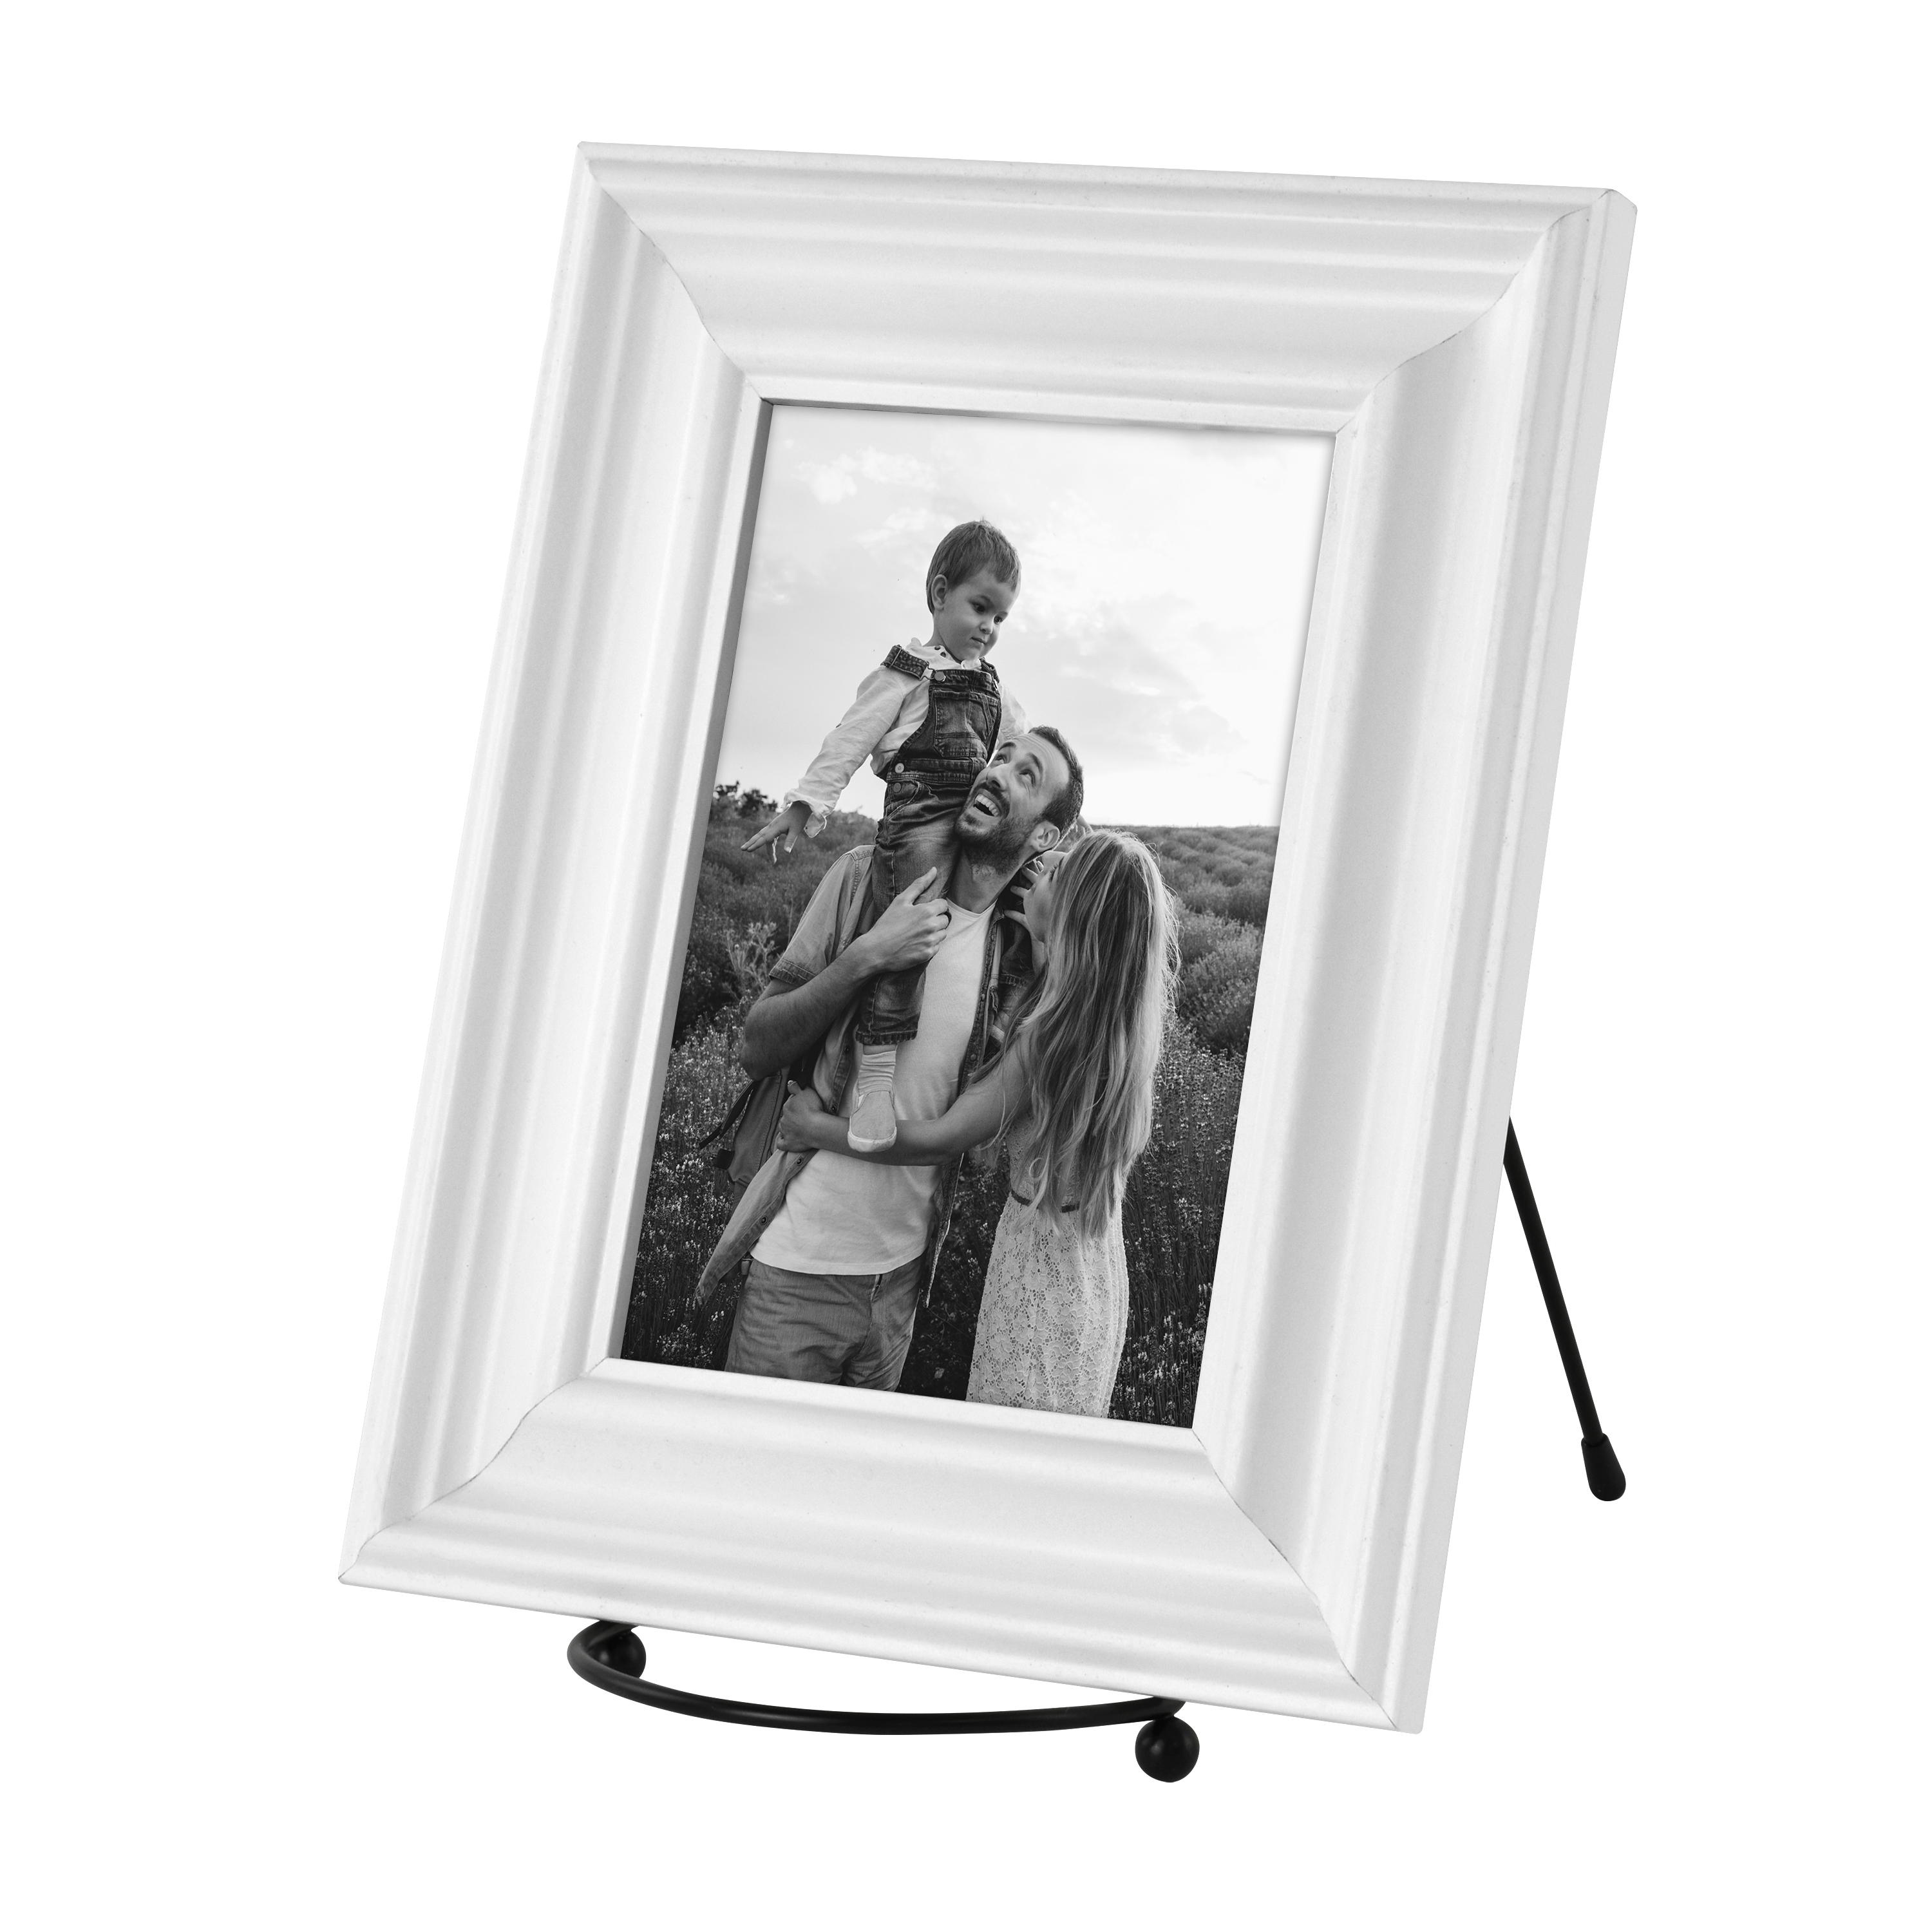 Mainstays 6" Classic Black Metal Picture Frame Easel - image 5 of 5